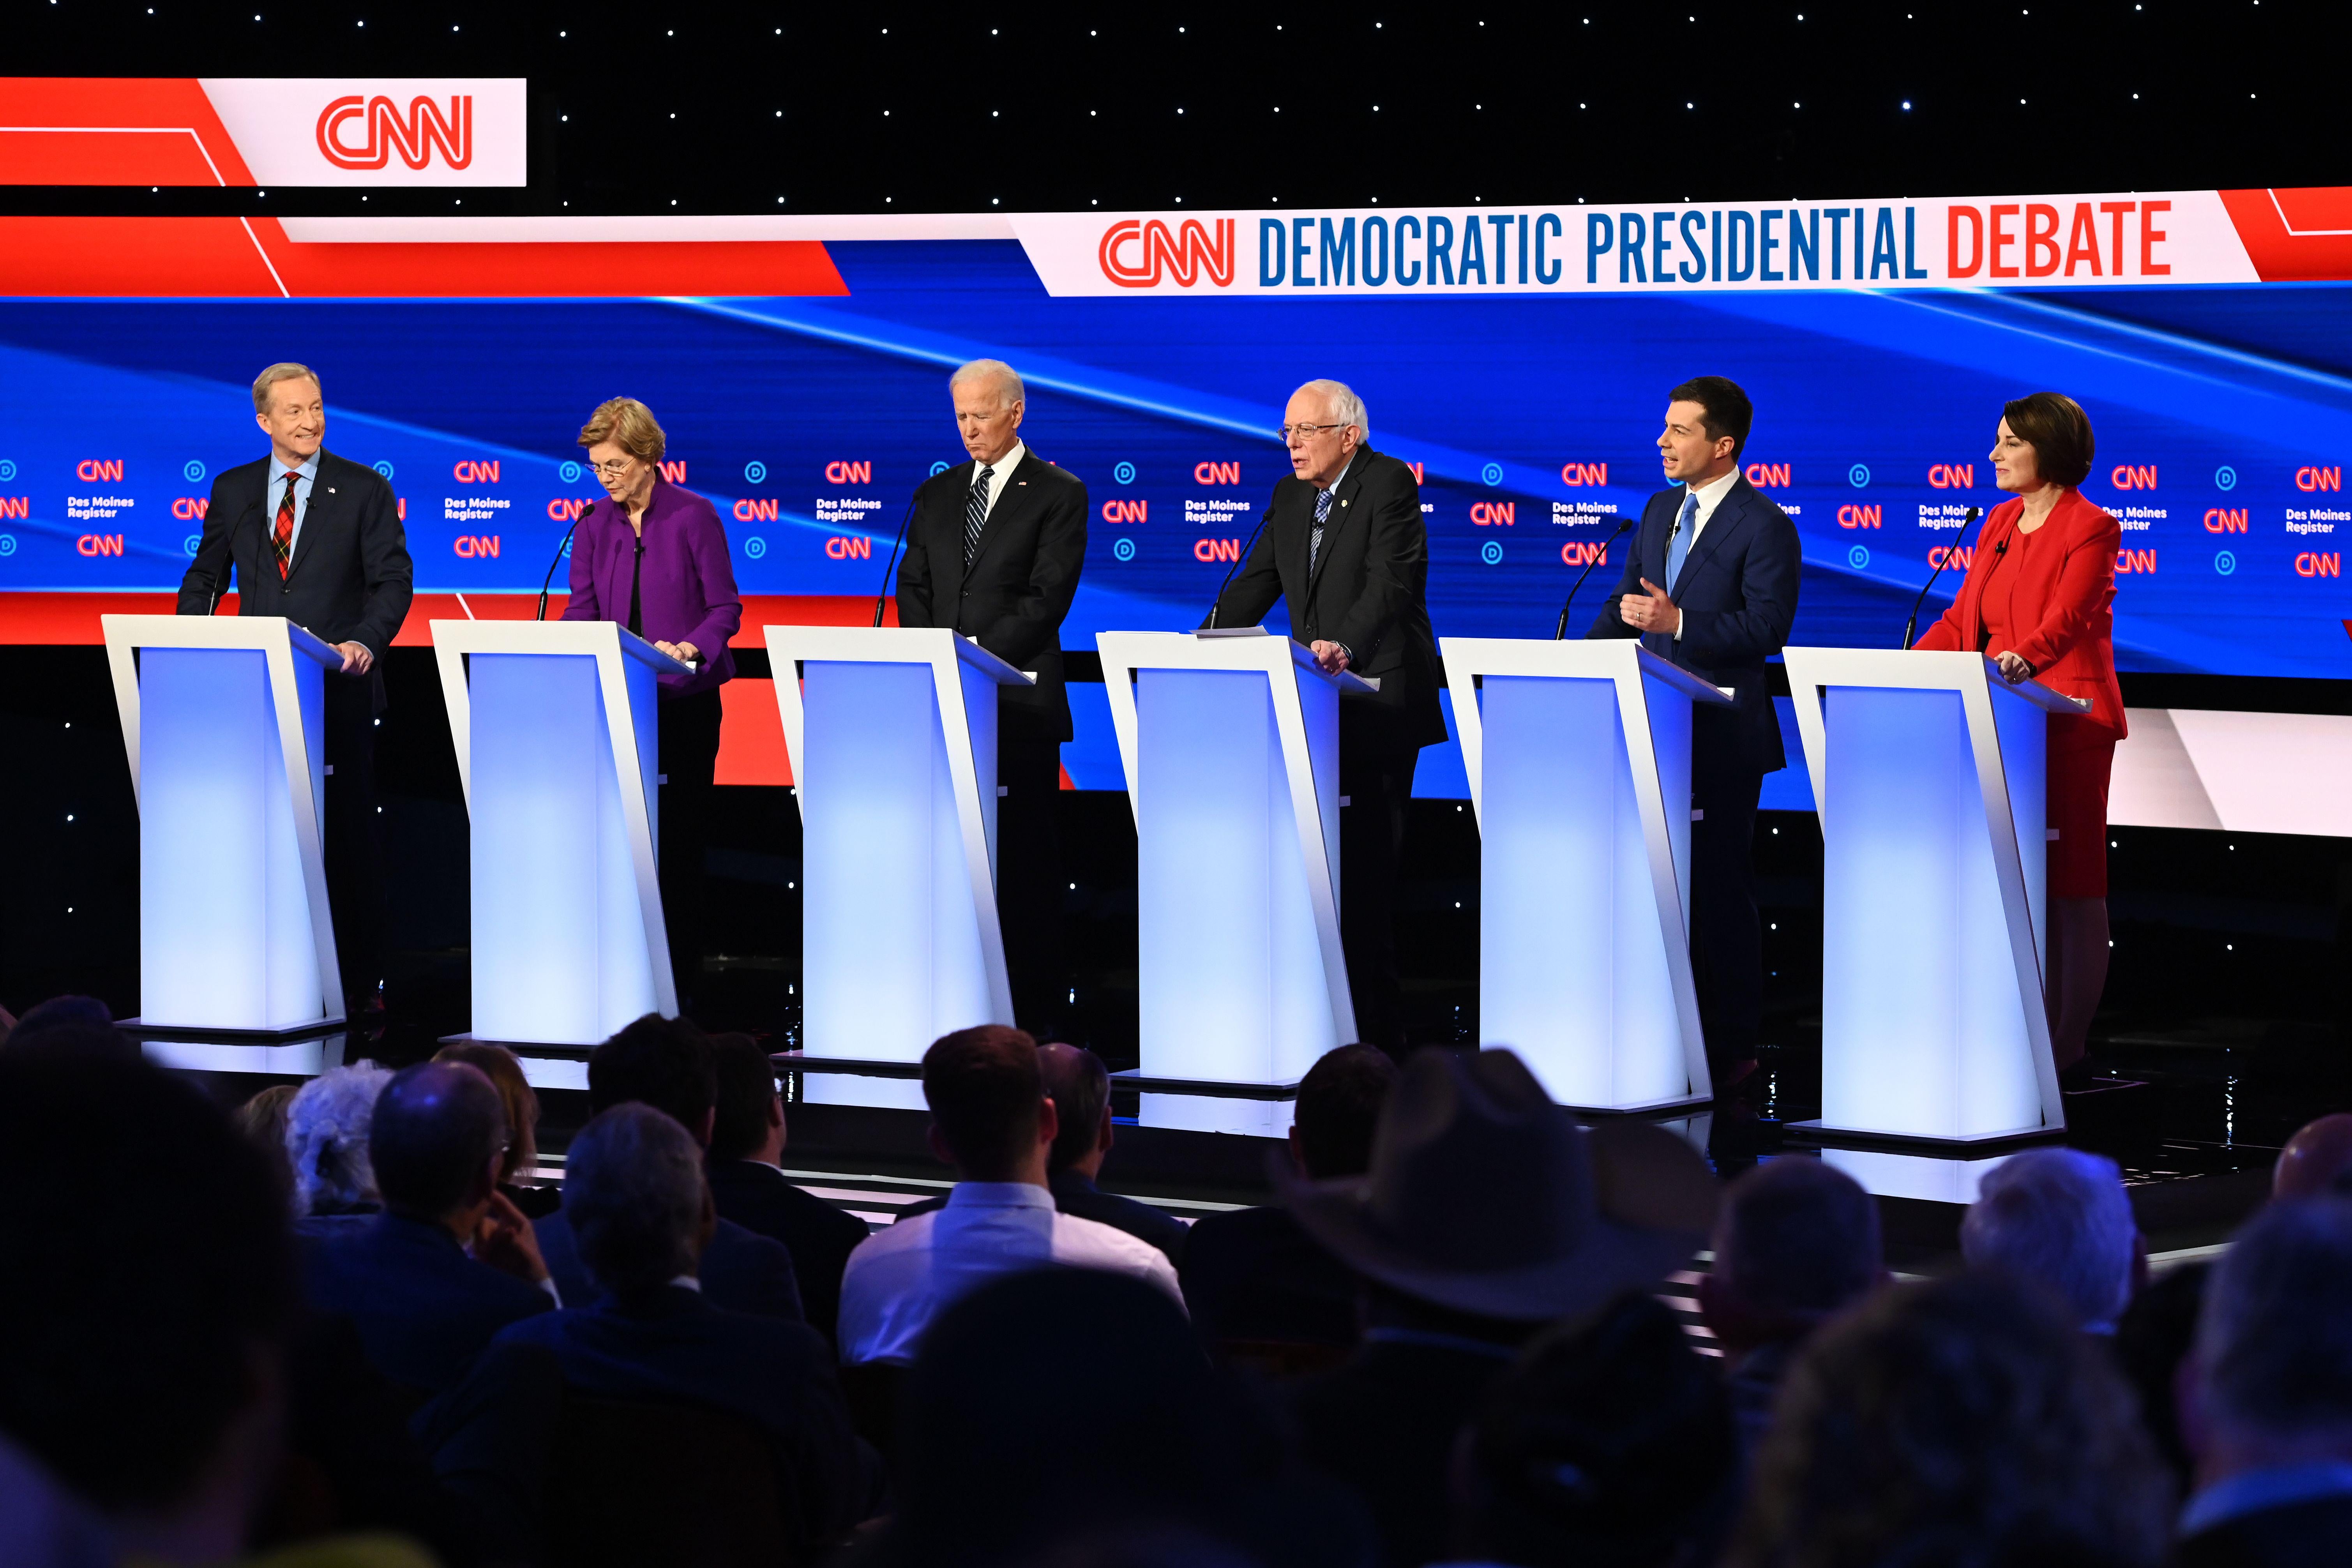 The Democratic candidates stand behind podiums on the debate stage.